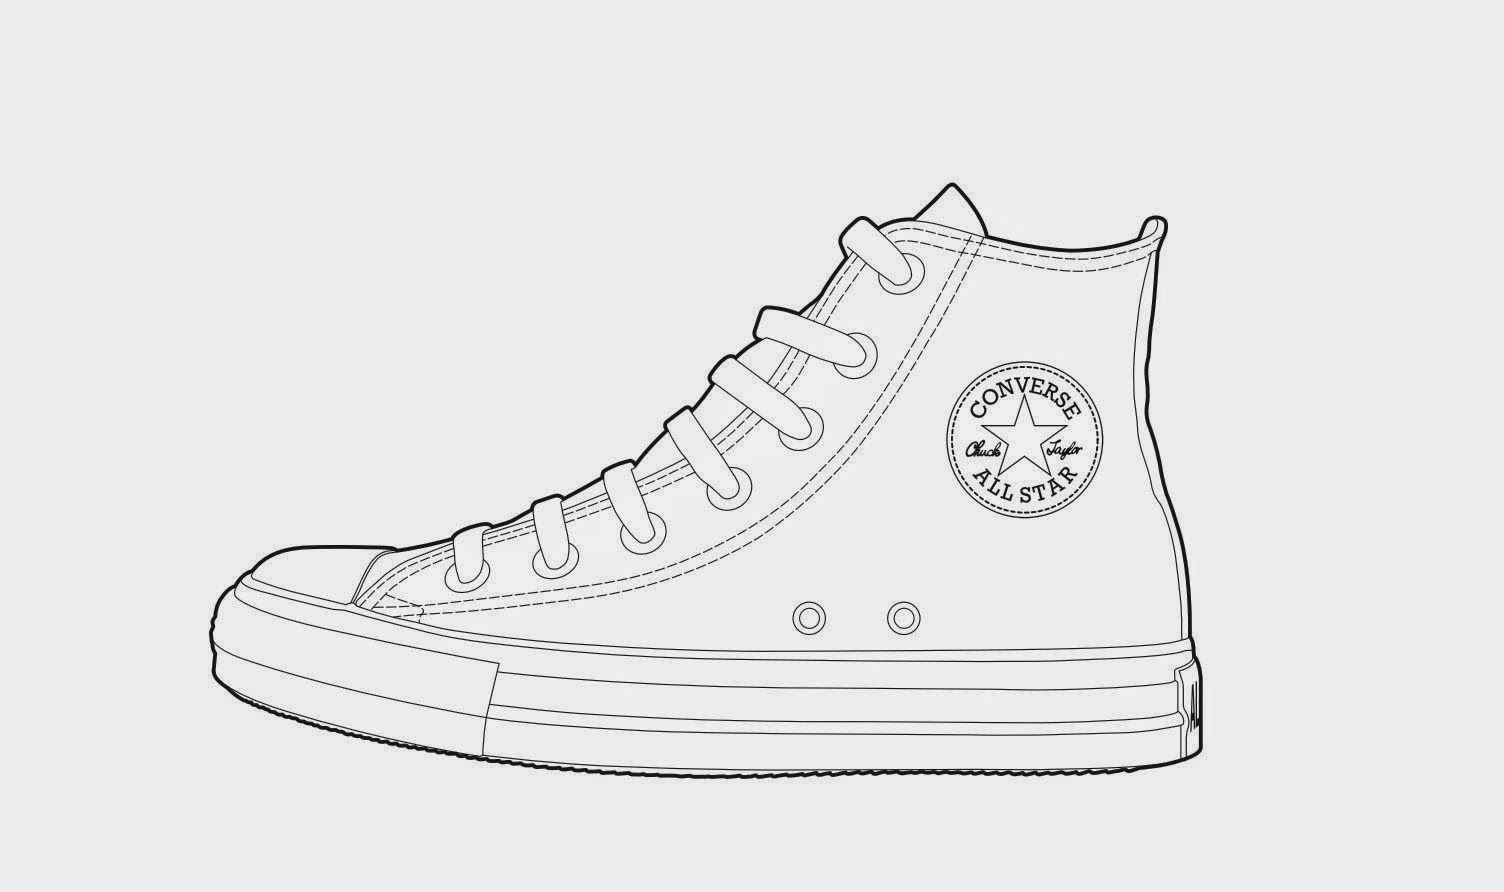 Plimentary colors converse sneakers drawing color converse converse drawing on shoes grunge